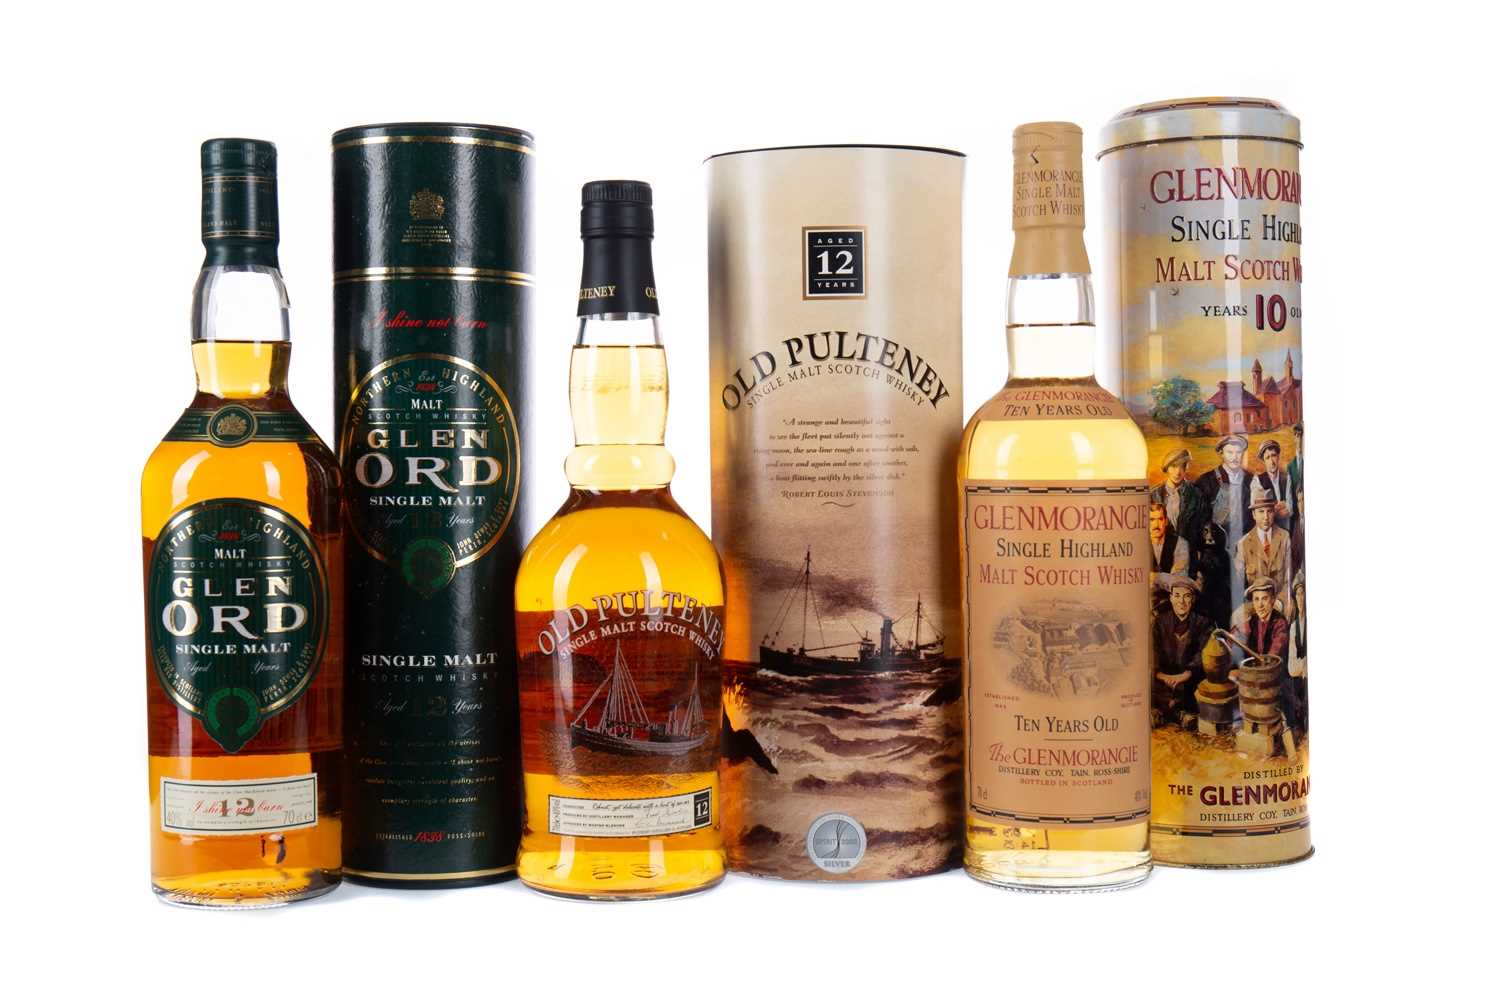 Lot 42 - GLEN ORD 12 YEARS OLD, GLENMORANGIE 10 YEARS OLD AND OLD PULTENEY AGED 12 YEARS